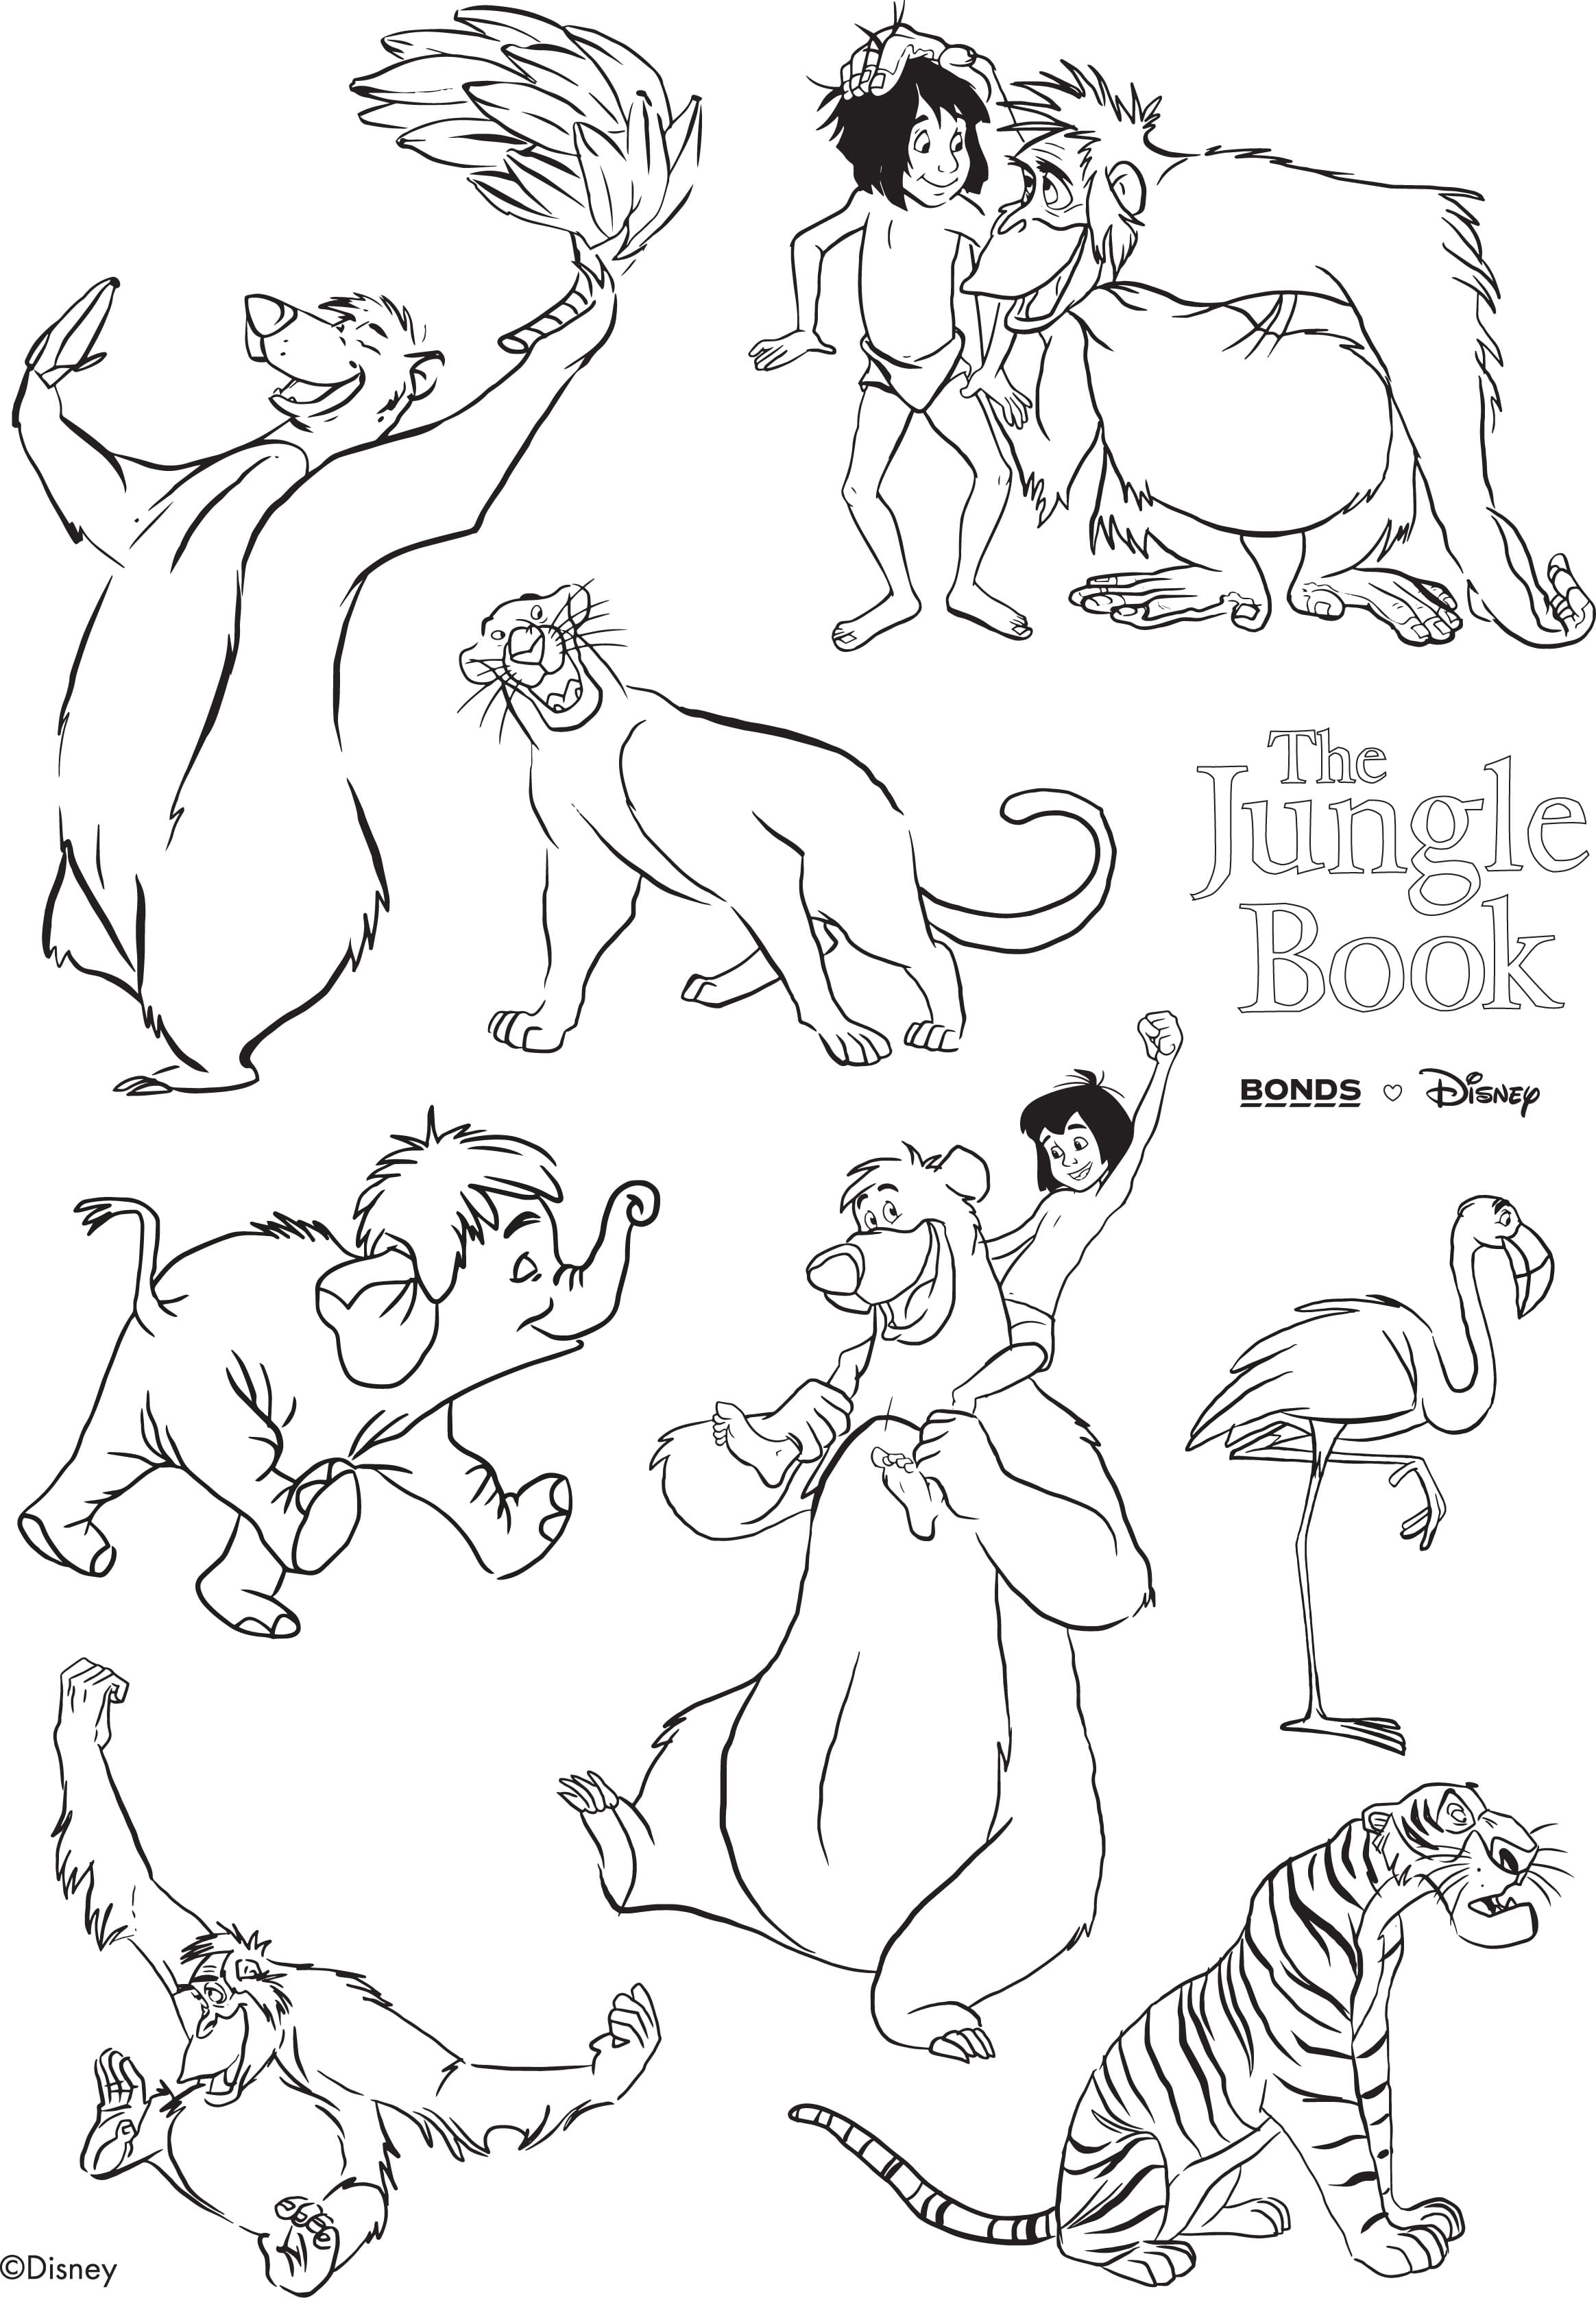 THE JUNGLE BOOK COLOURING SHEET DOWNLOAD NOW Blog